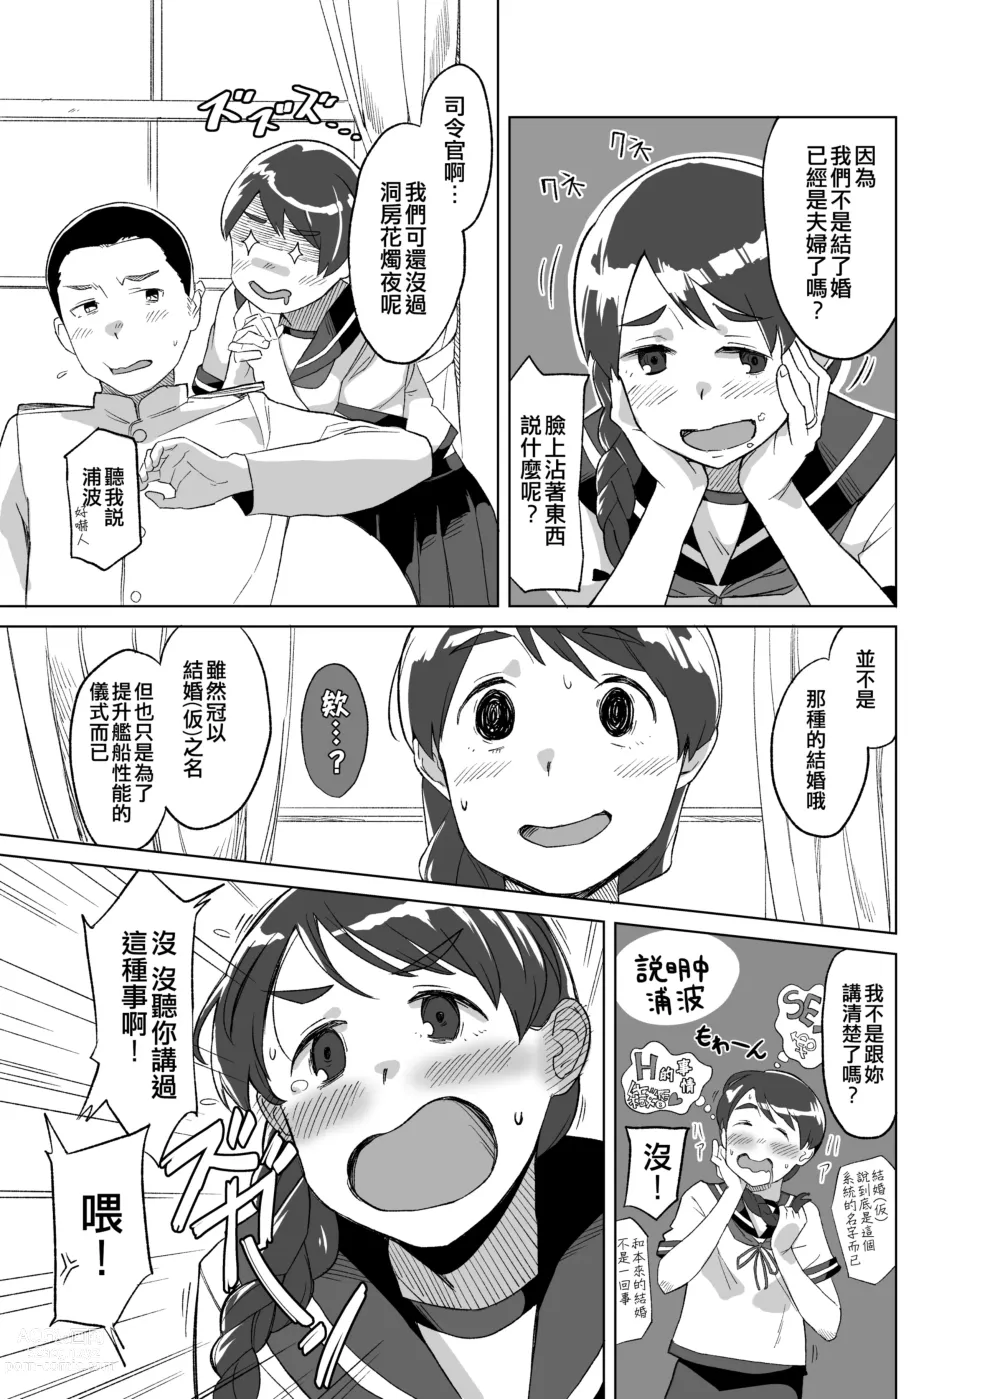 Page 5 of doujinshi Ding Dong